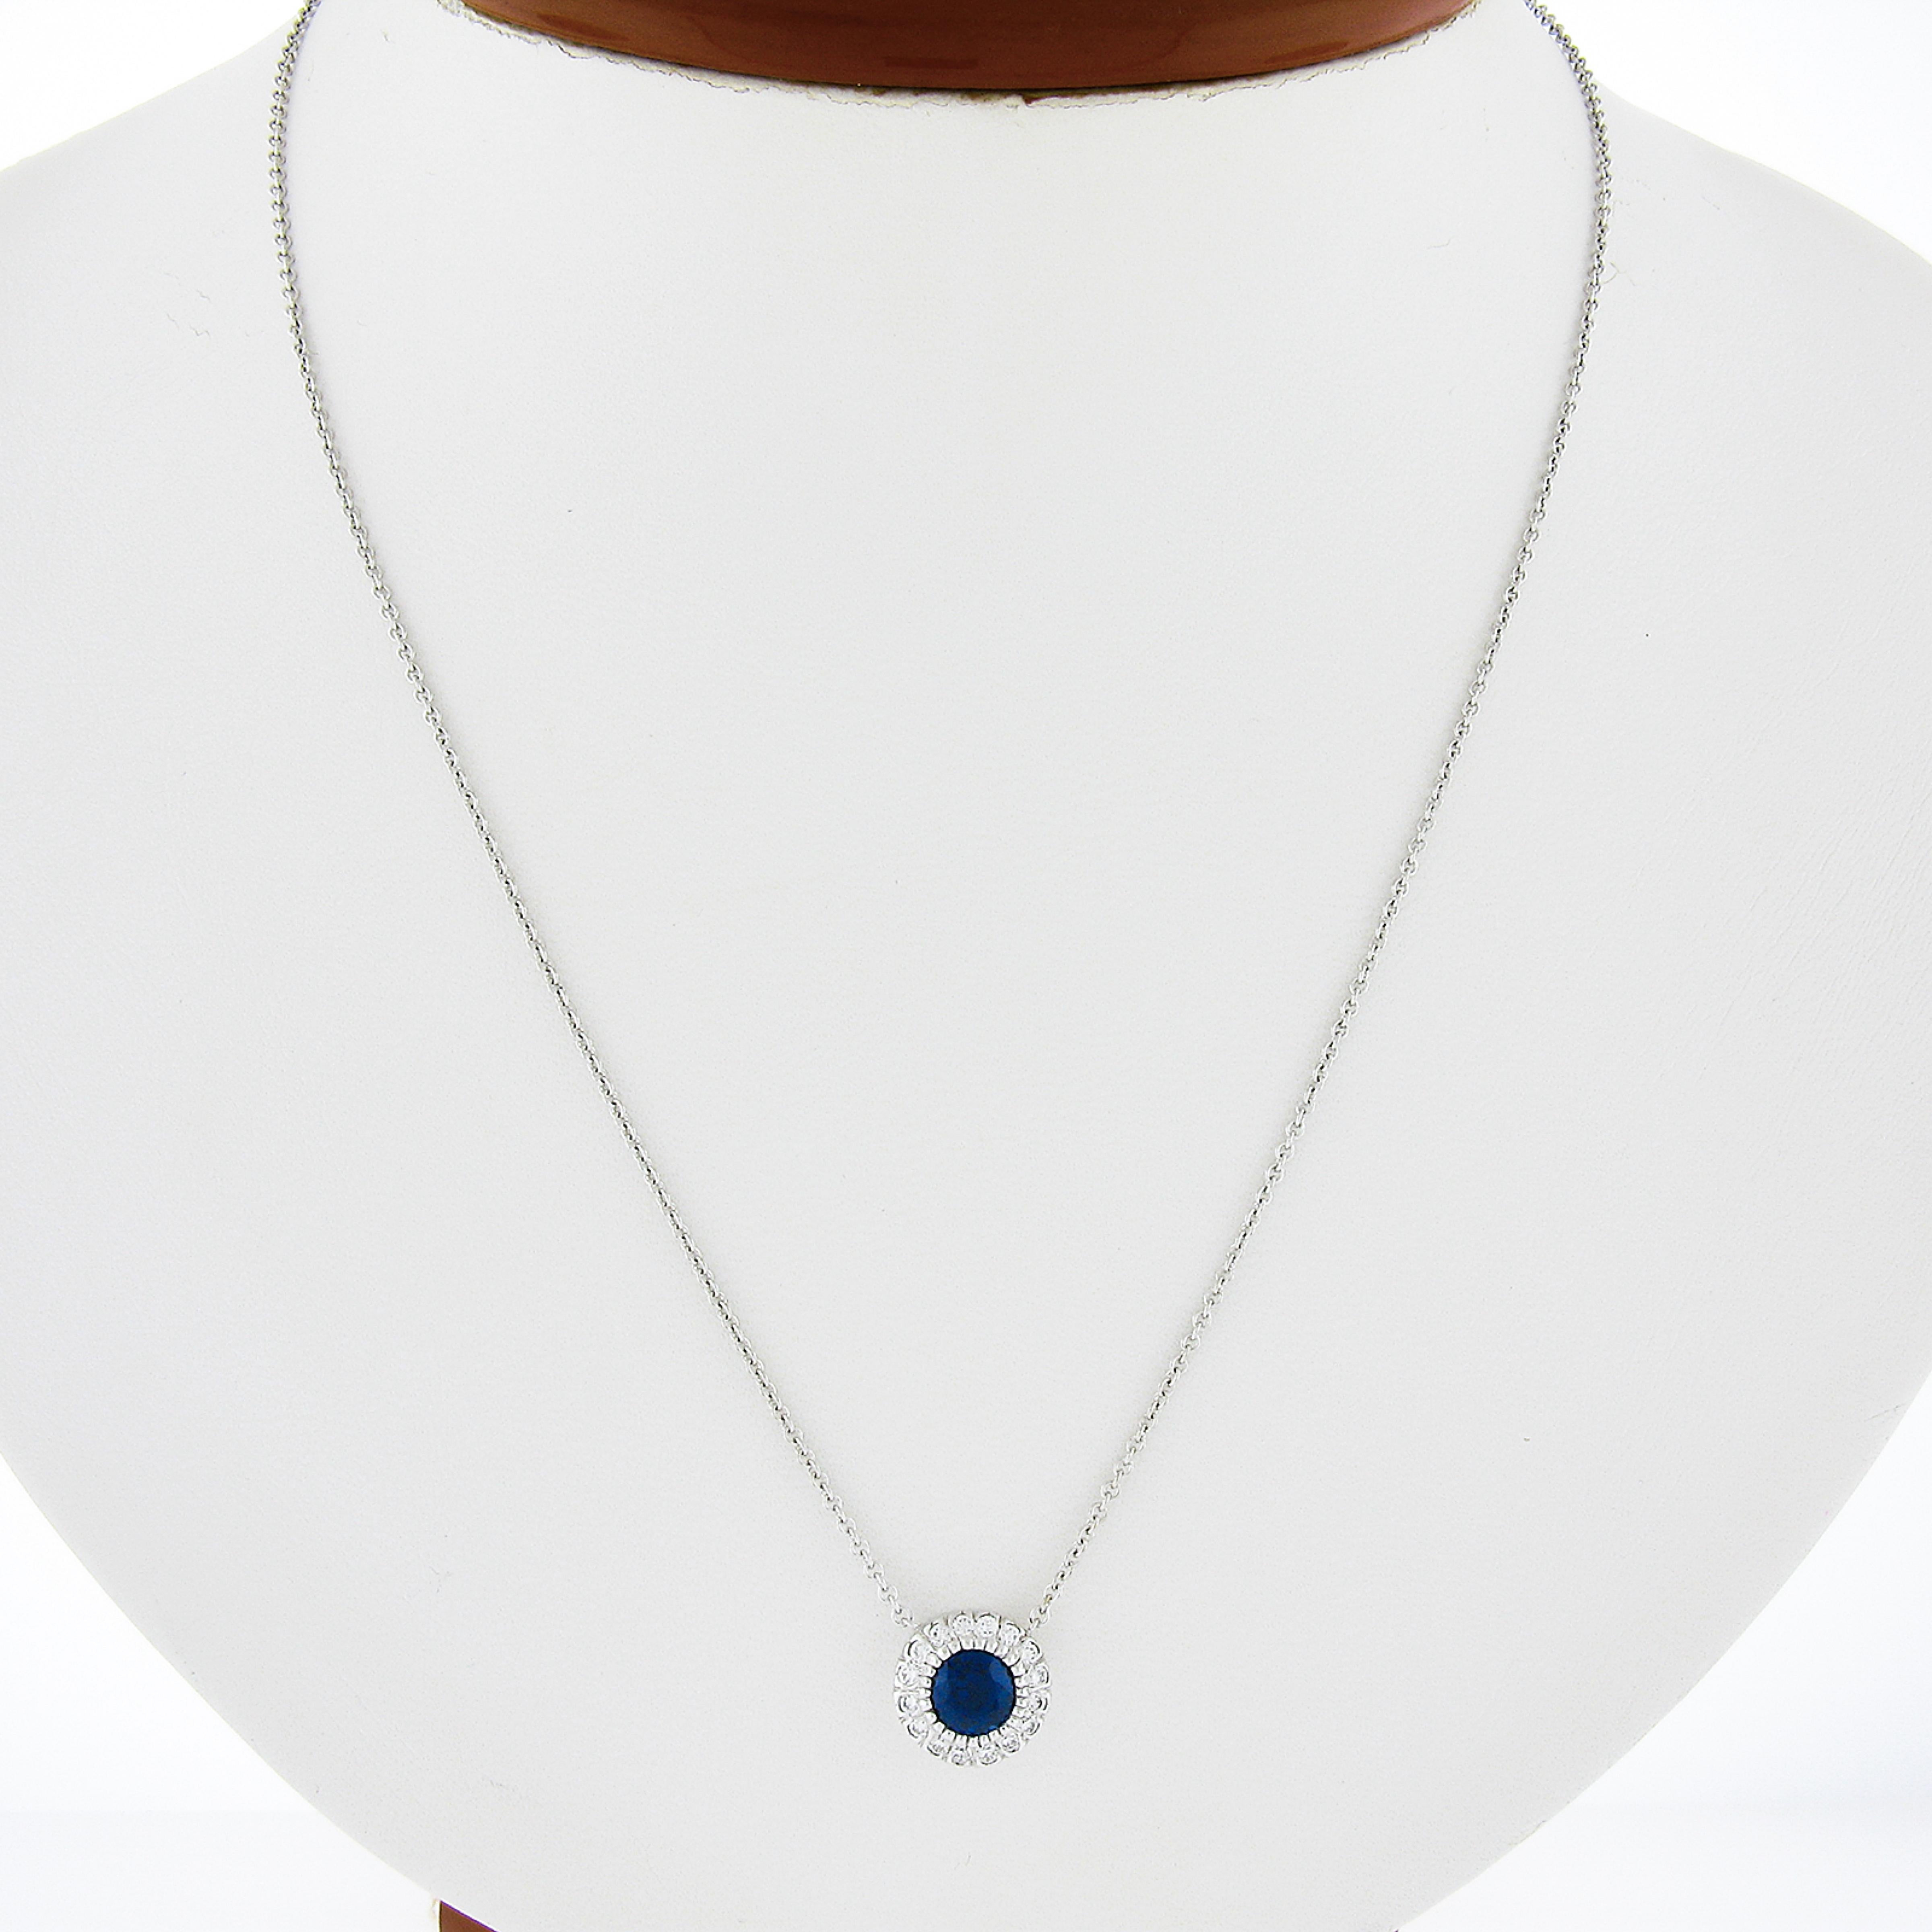 This stunning pendant necklace is newly crafted in solid 14k white gold and features a gorgeous sapphire solitaire neatly multi-prong set at the center of a fine diamond halo. The round brilliant cut sapphire weighs exactly 0.82 carats, and stands